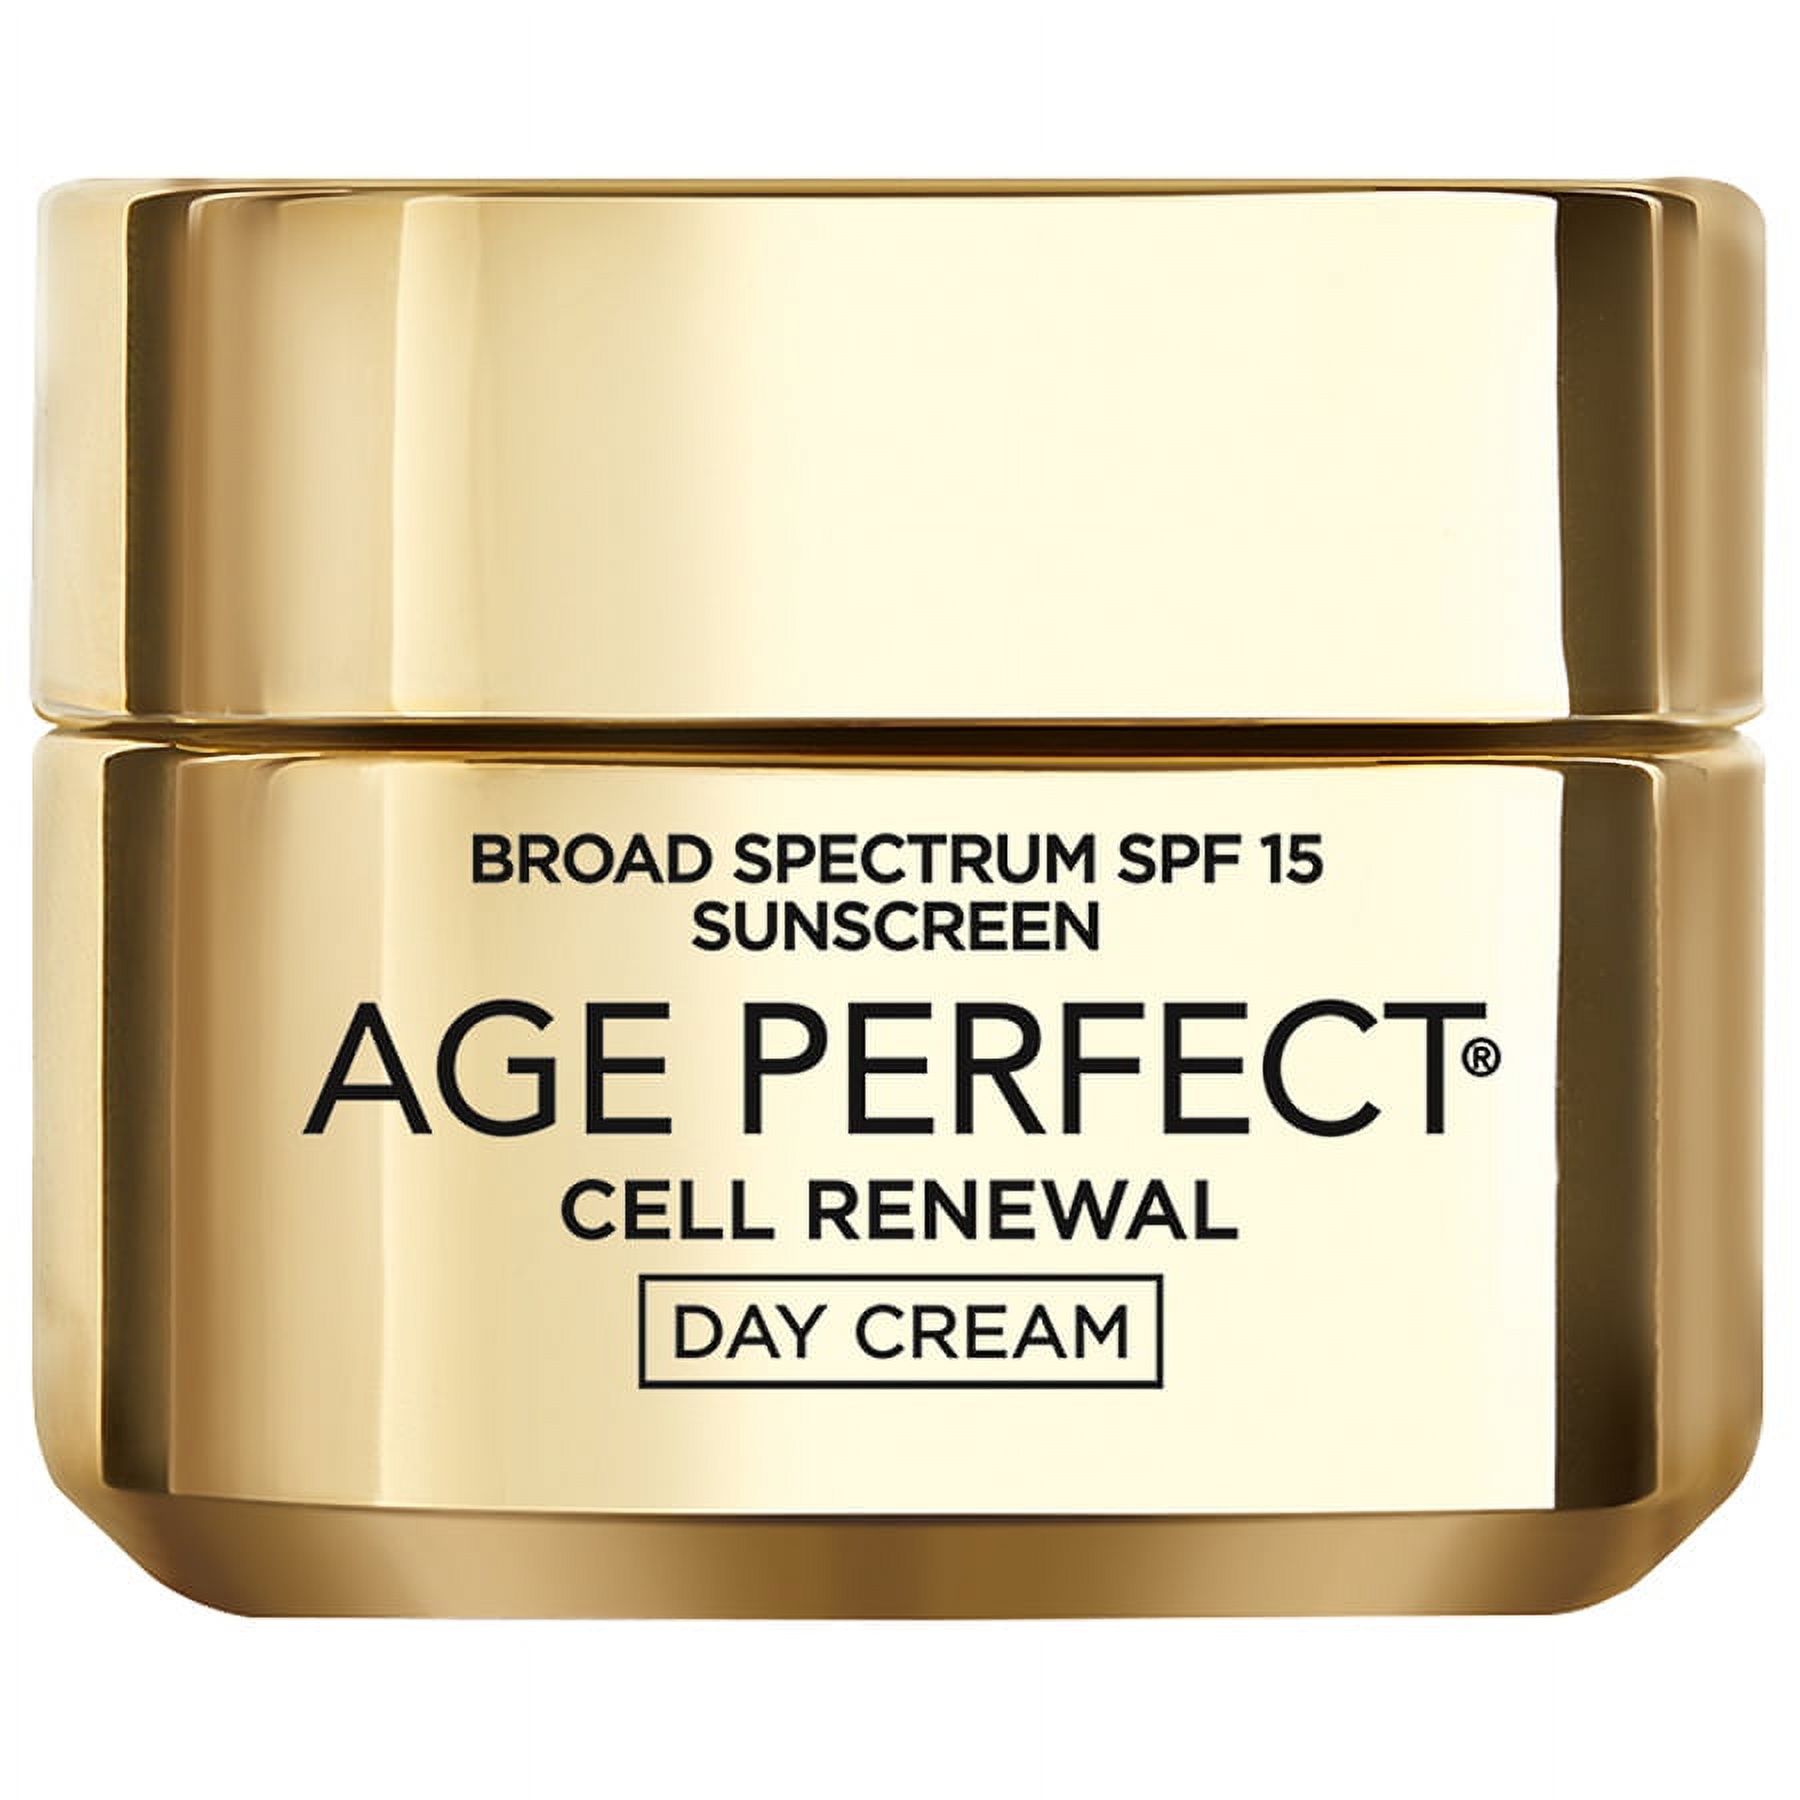 L'Oreal Paris Age Perfect Cell Renewal Day Cream Broad Spectrum SPF 15 Sunscreen, 1.7 oz - image 1 of 11